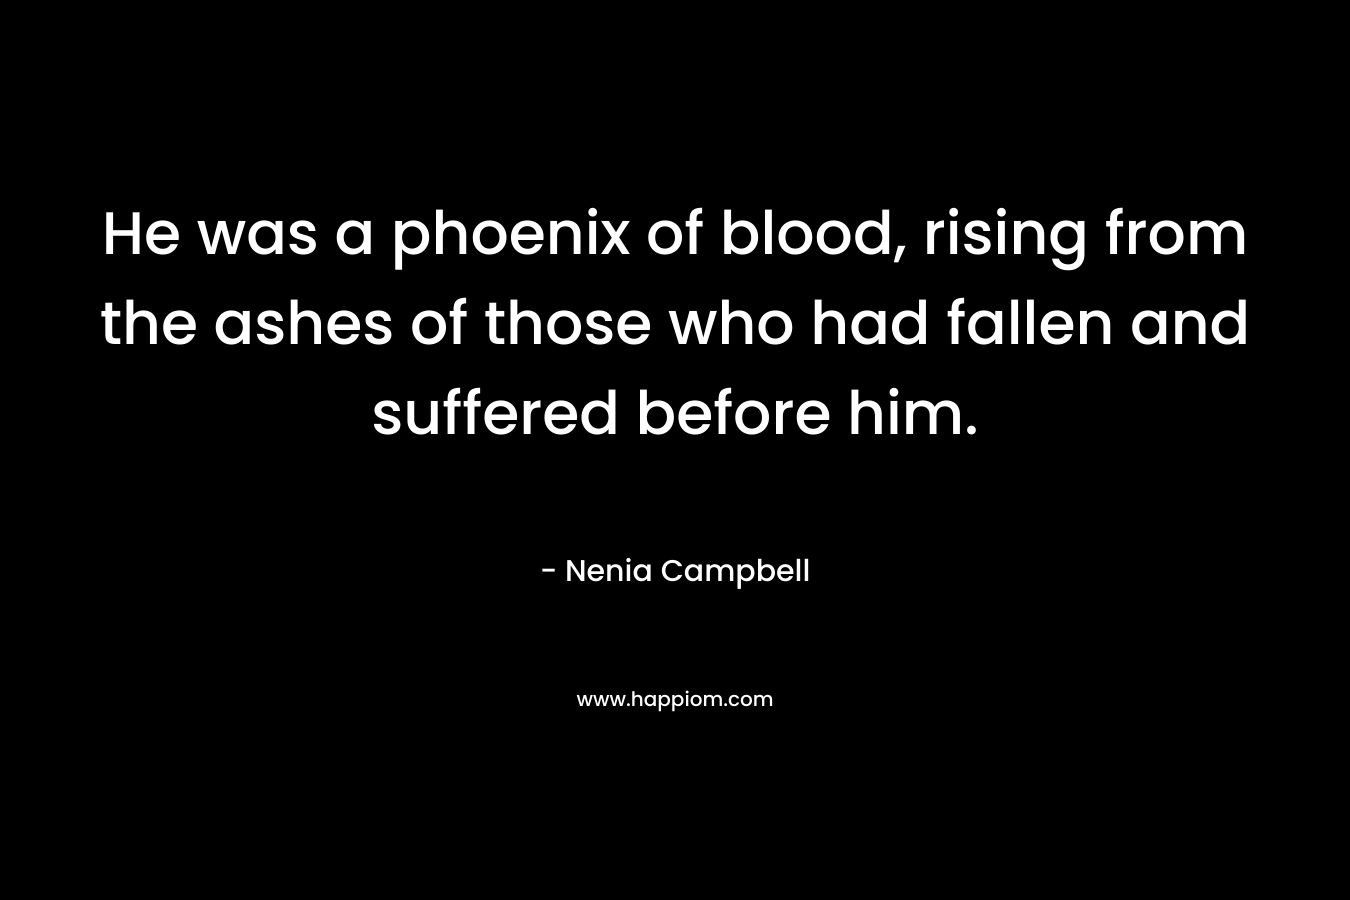 He was a phoenix of blood, rising from the ashes of those who had fallen and suffered before him. – Nenia Campbell